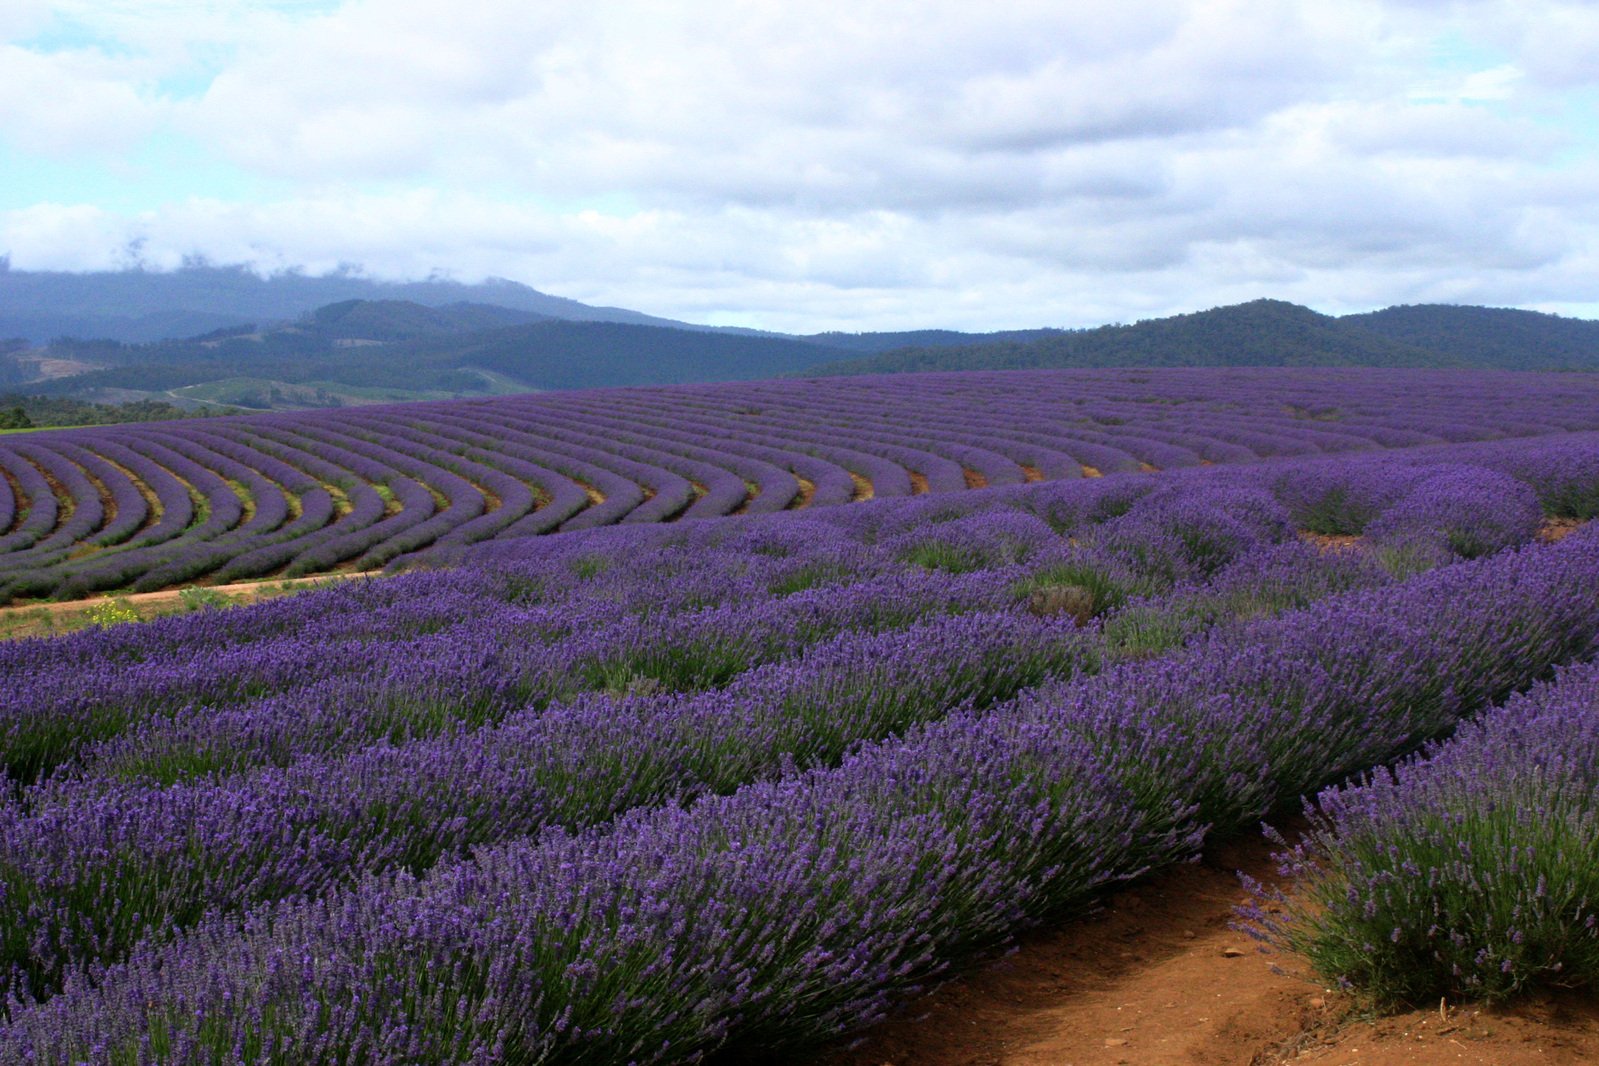 a field with many purple lavender plants